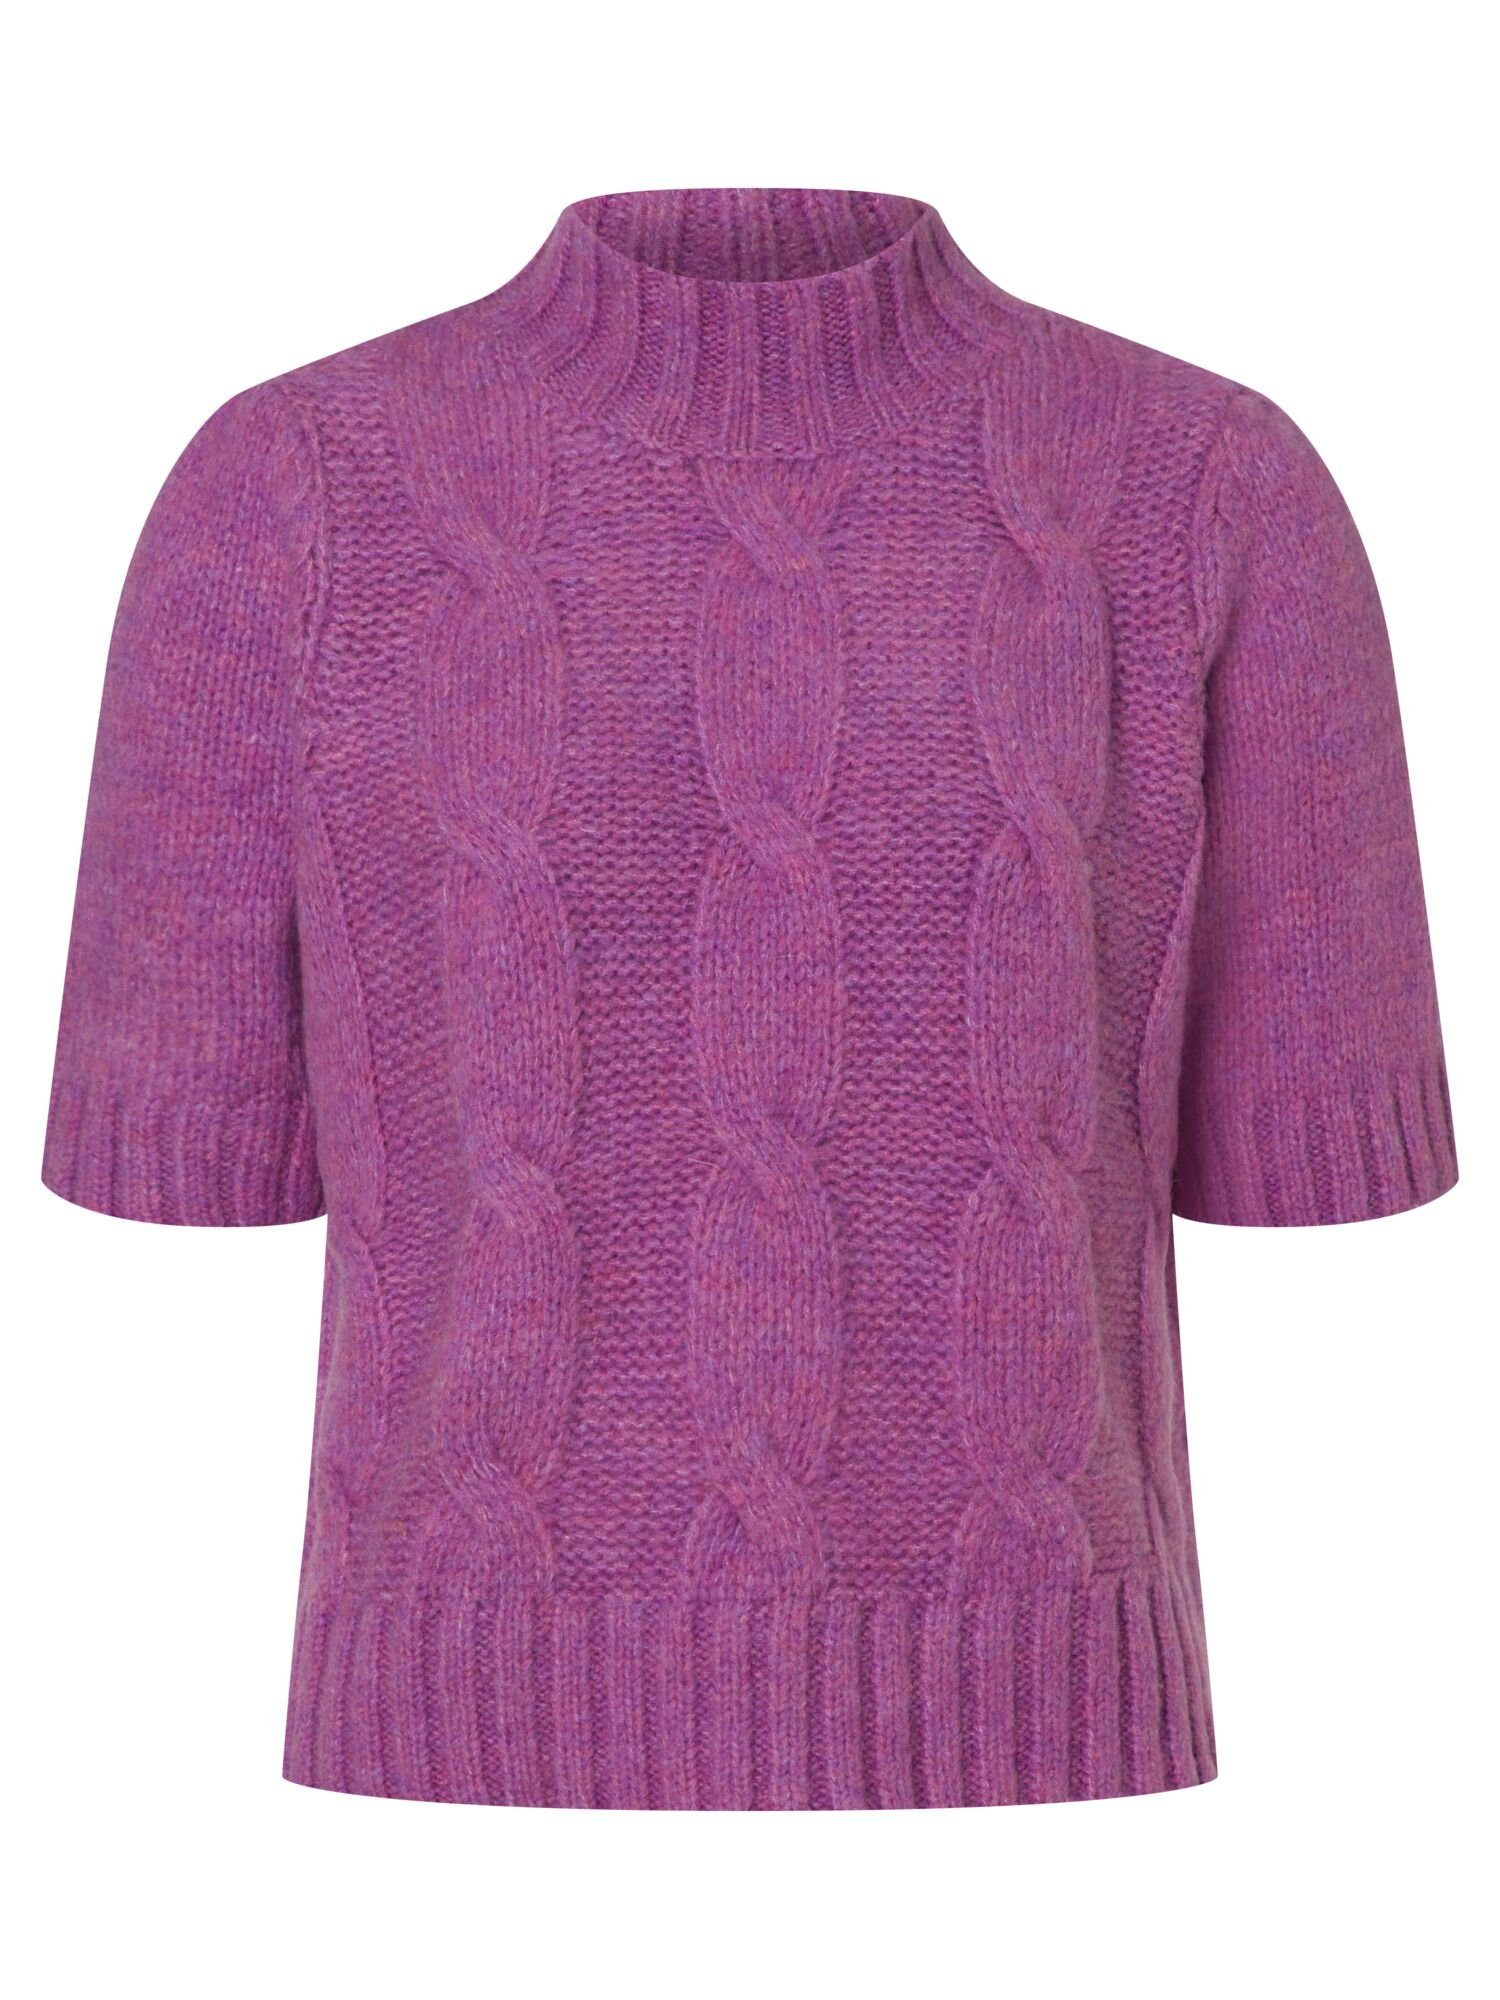 MORE&MORE Strickpullover lila meliert